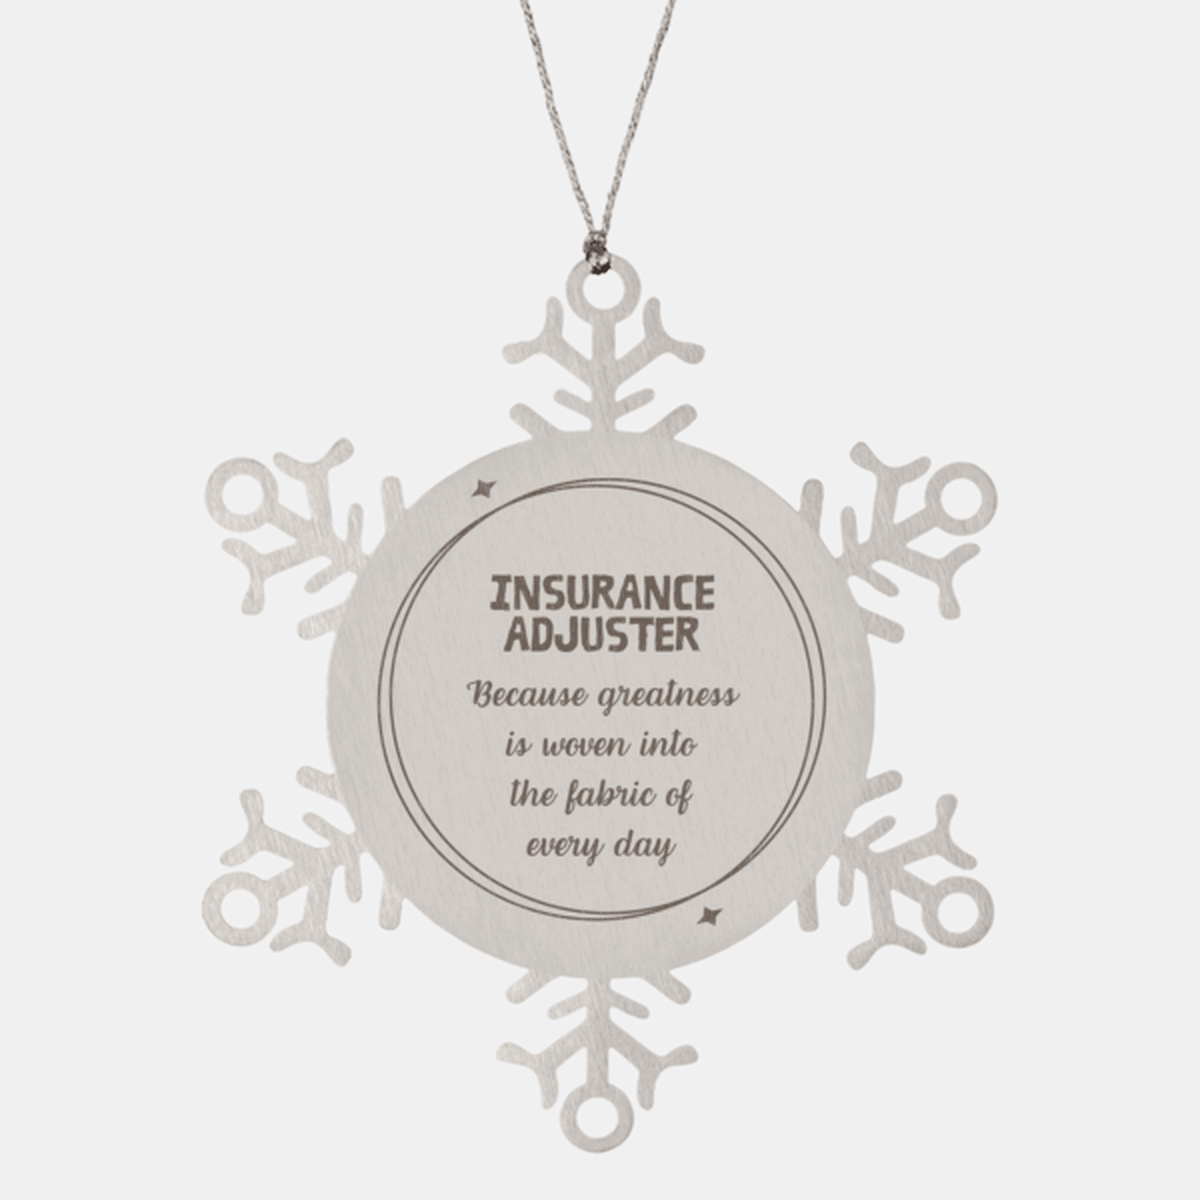 Sarcastic Insurance Adjuster Snowflake Ornament Gifts, Christmas Holiday Gifts for Insurance Adjuster Ornament, Insurance Adjuster: Because greatness is woven into the fabric of every day, Coworkers, Friends - Mallard Moon Gift Shop